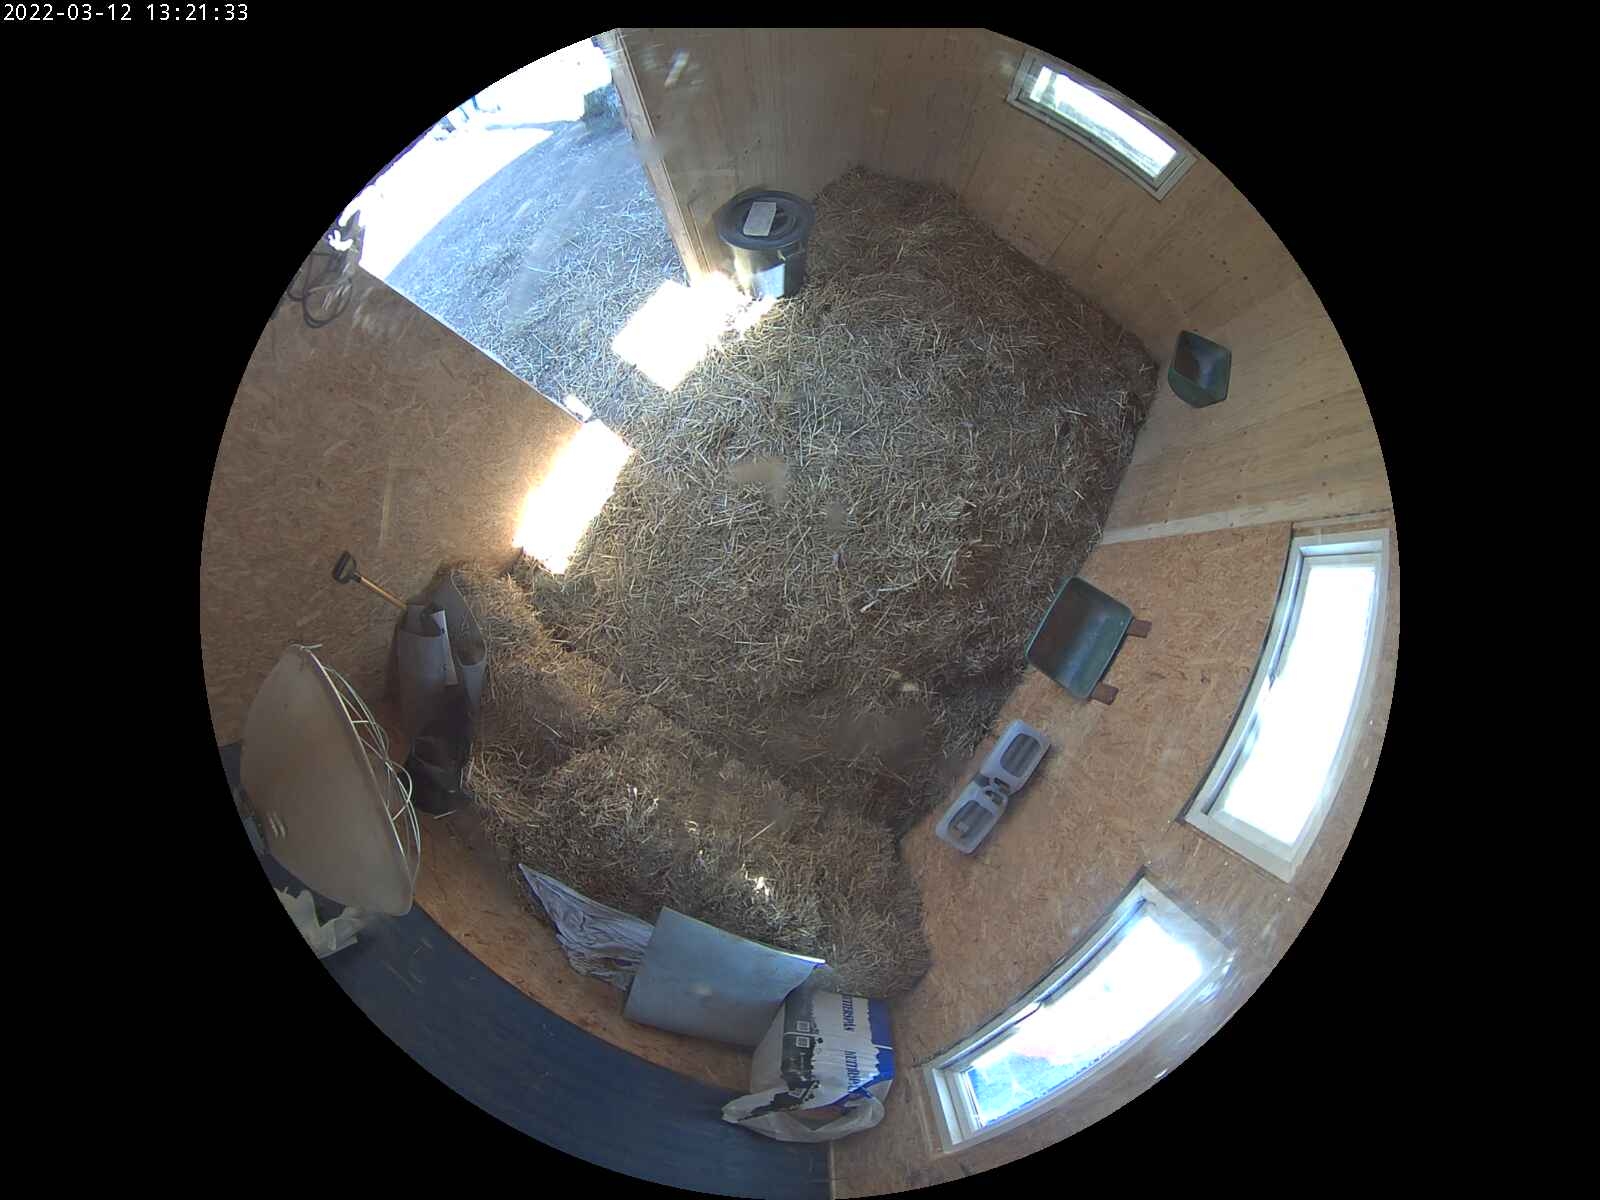 preview: IP camera - Hoerby